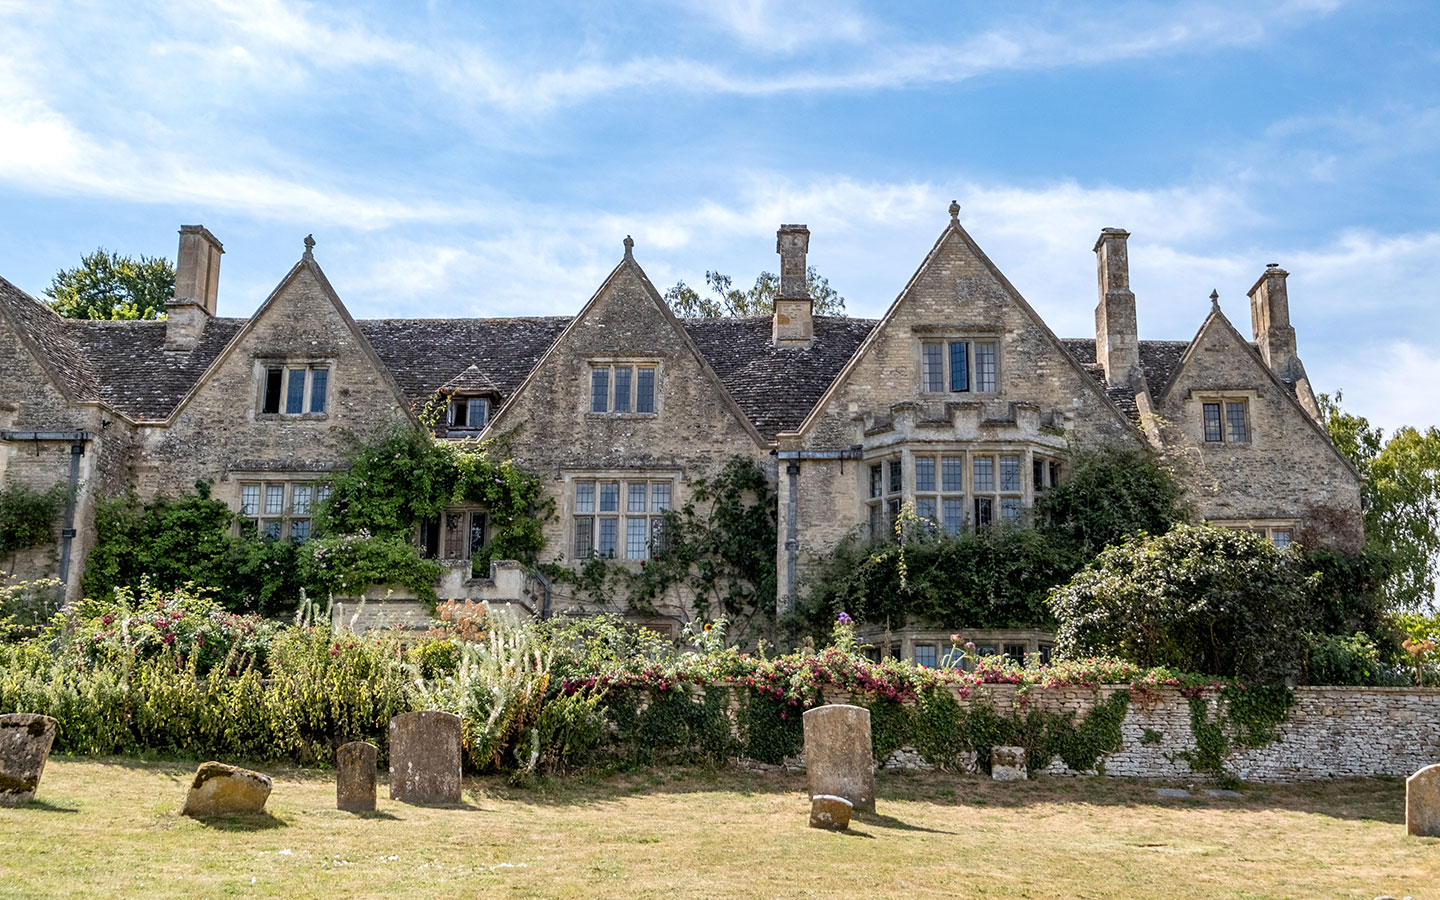 The Mitfords' former house in Asthall on the Cotswolds Romantic Road